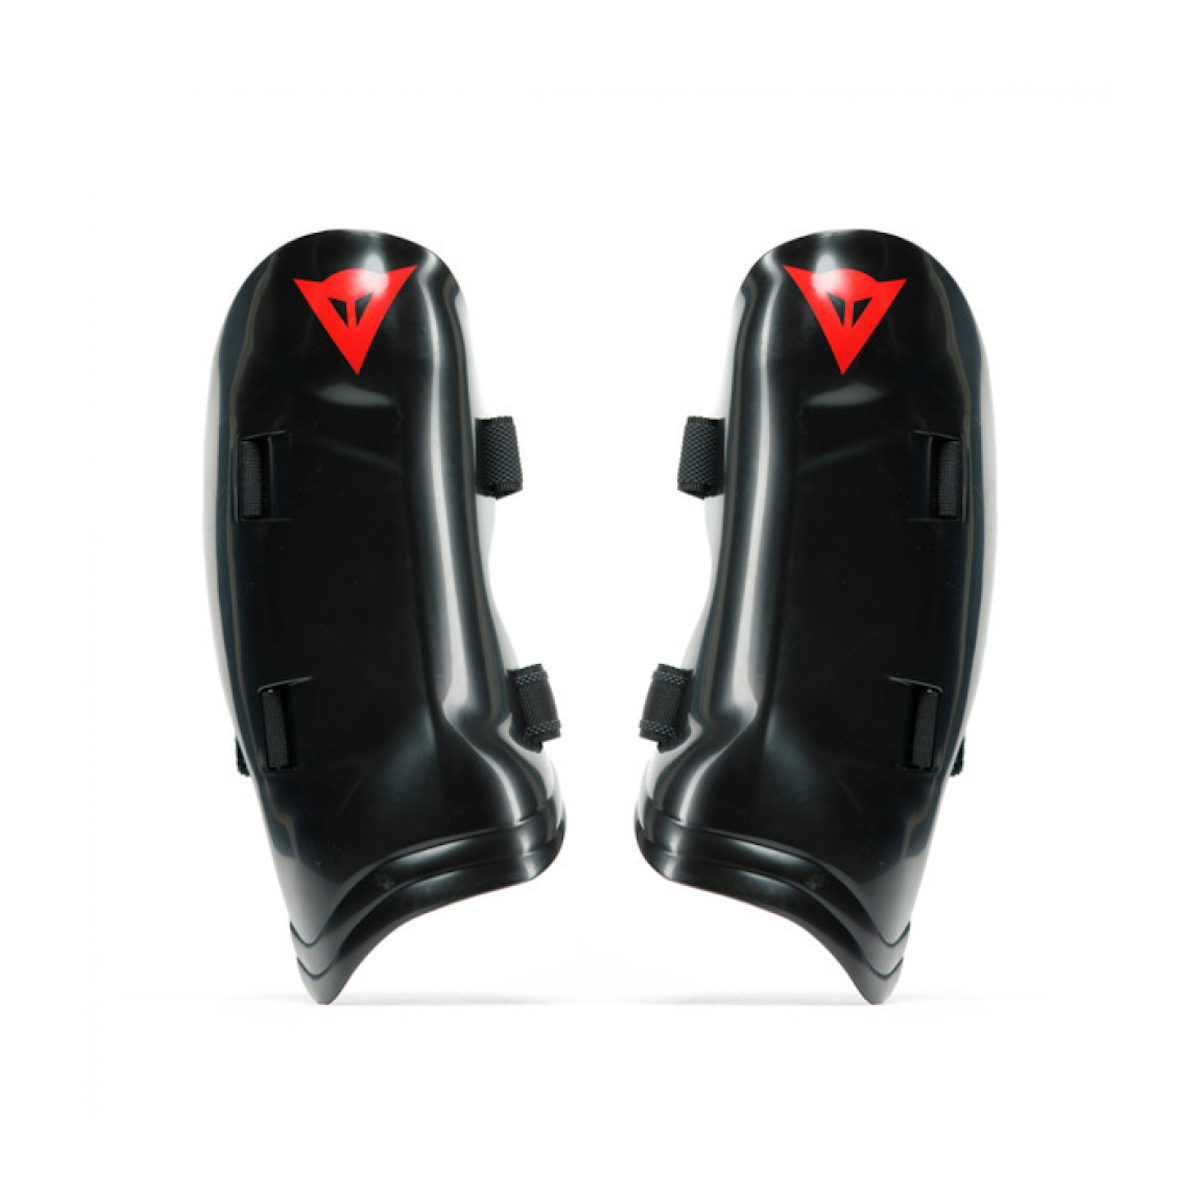 DAINESE SCARABEO R001 JR shin guards - black/red